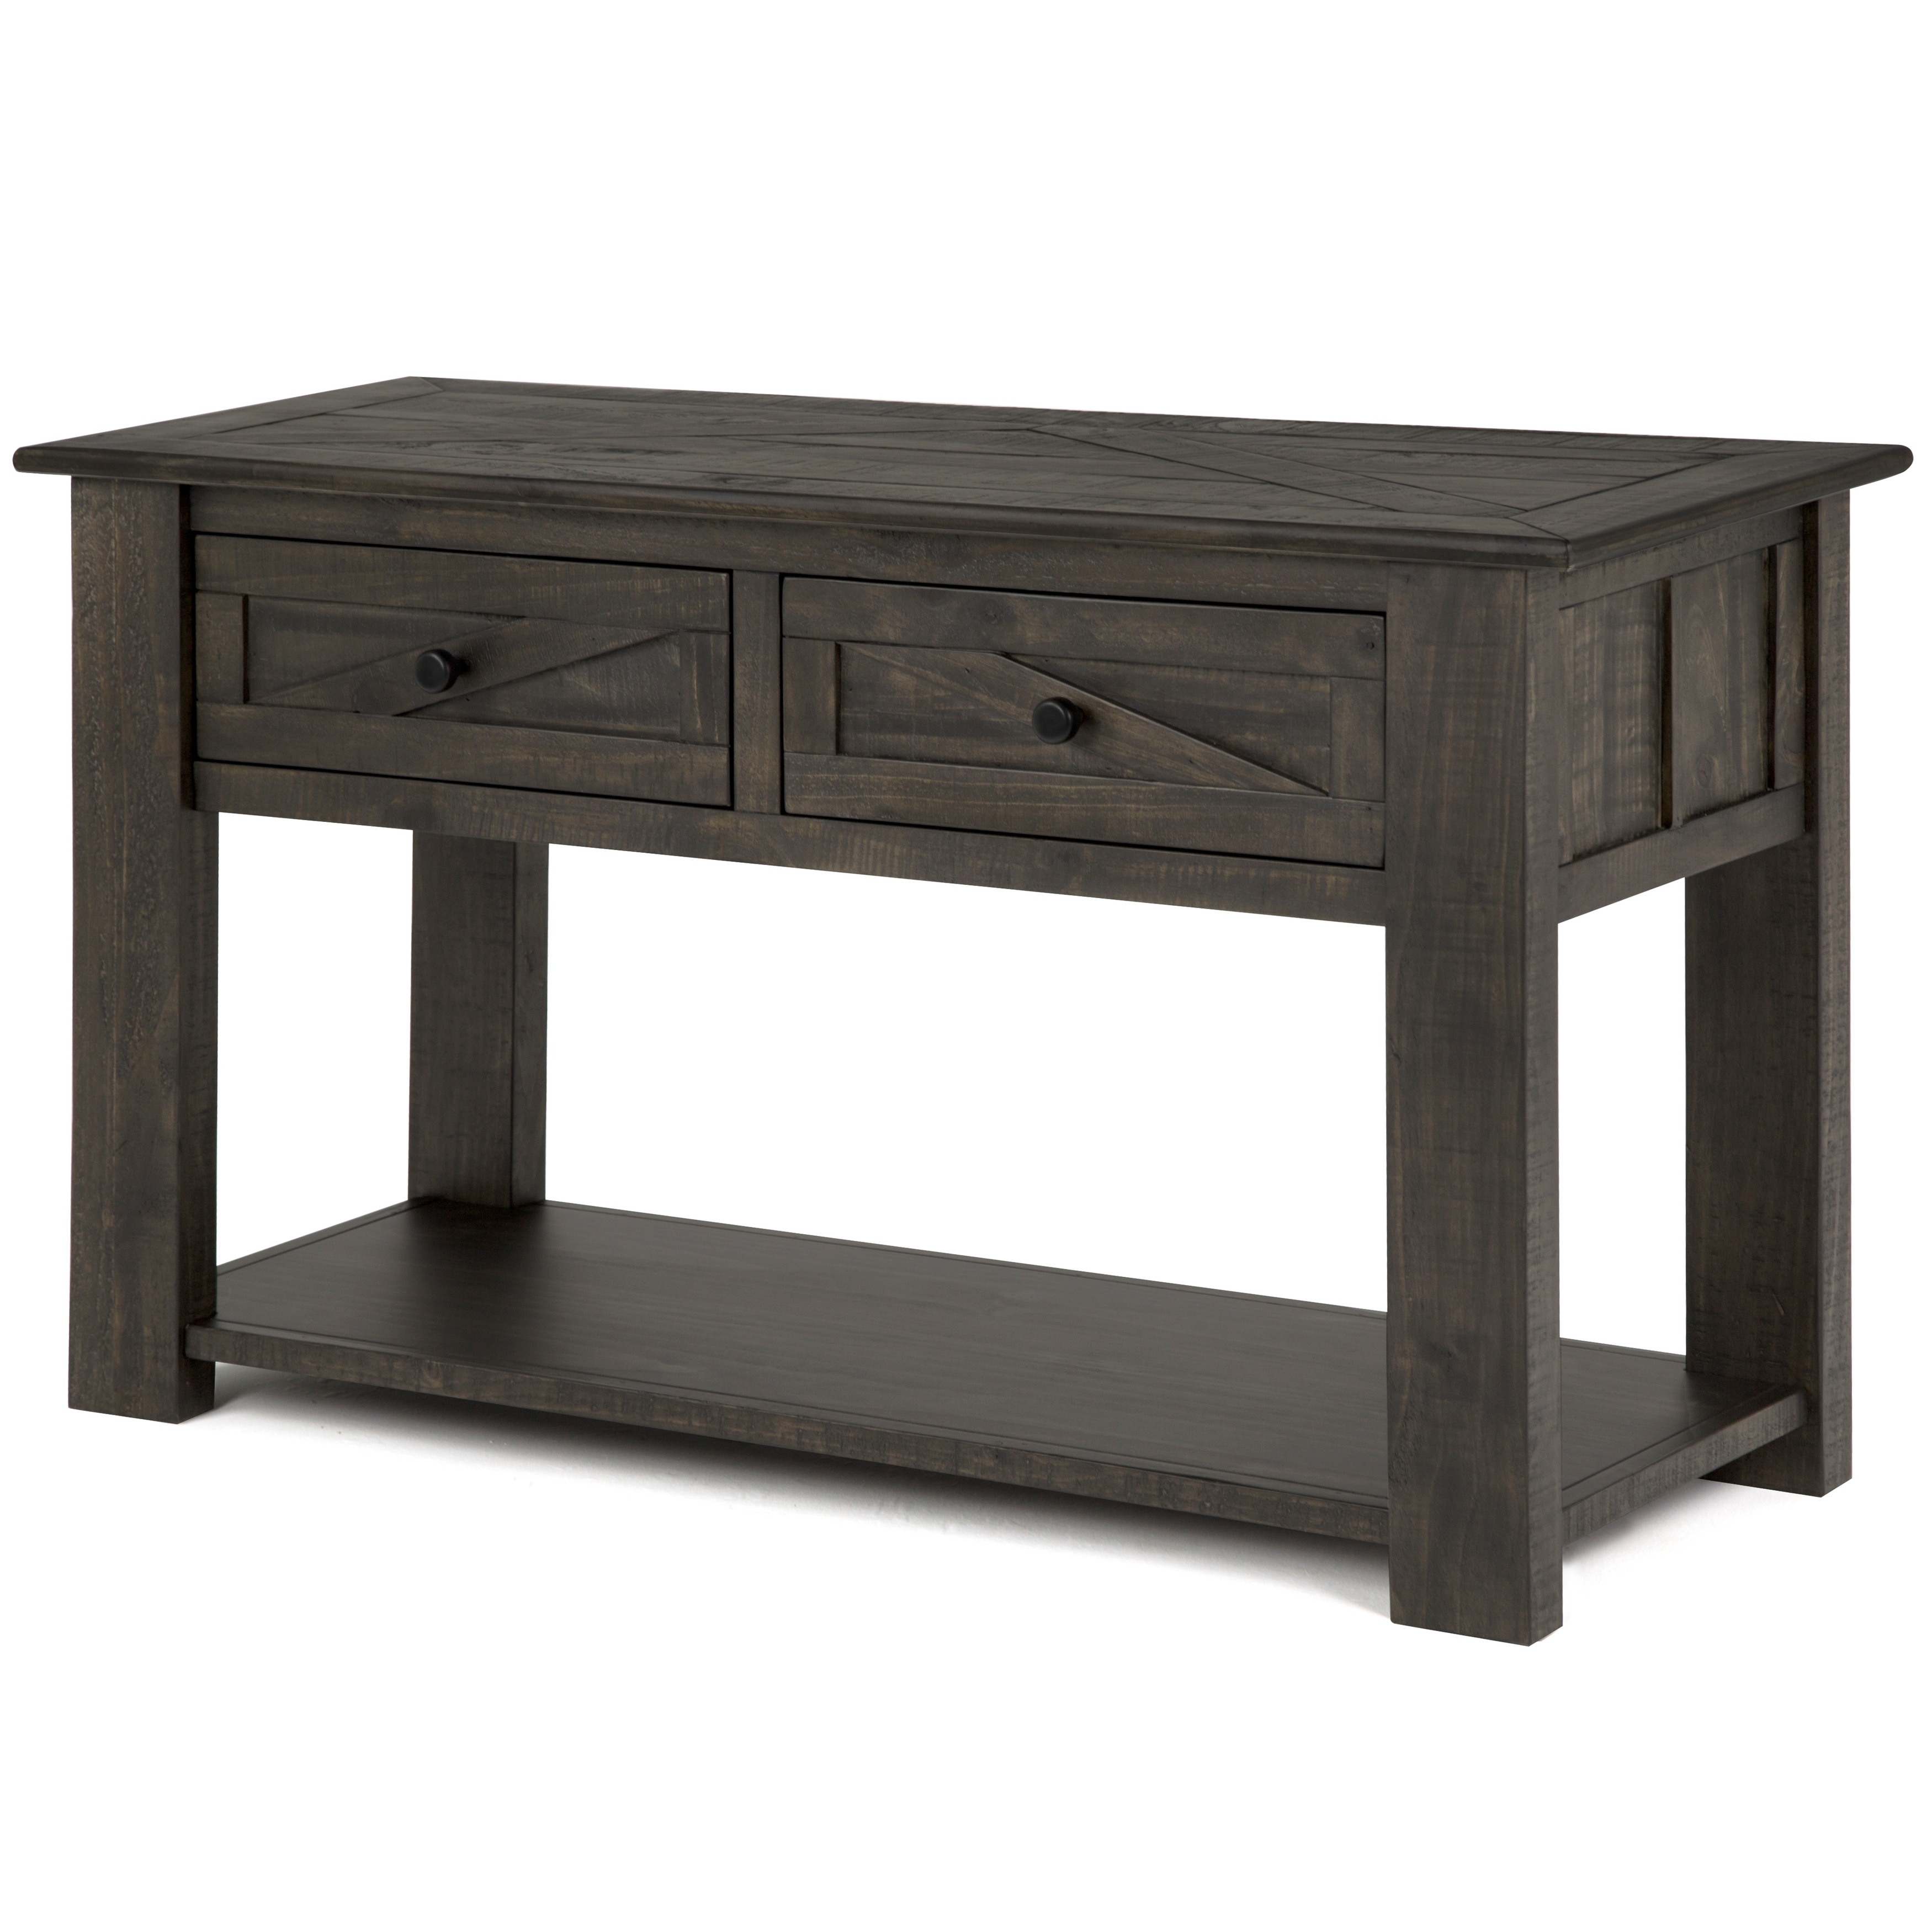 Shop Garrett Rustic Weathered Charcoal Storage Entryway Console